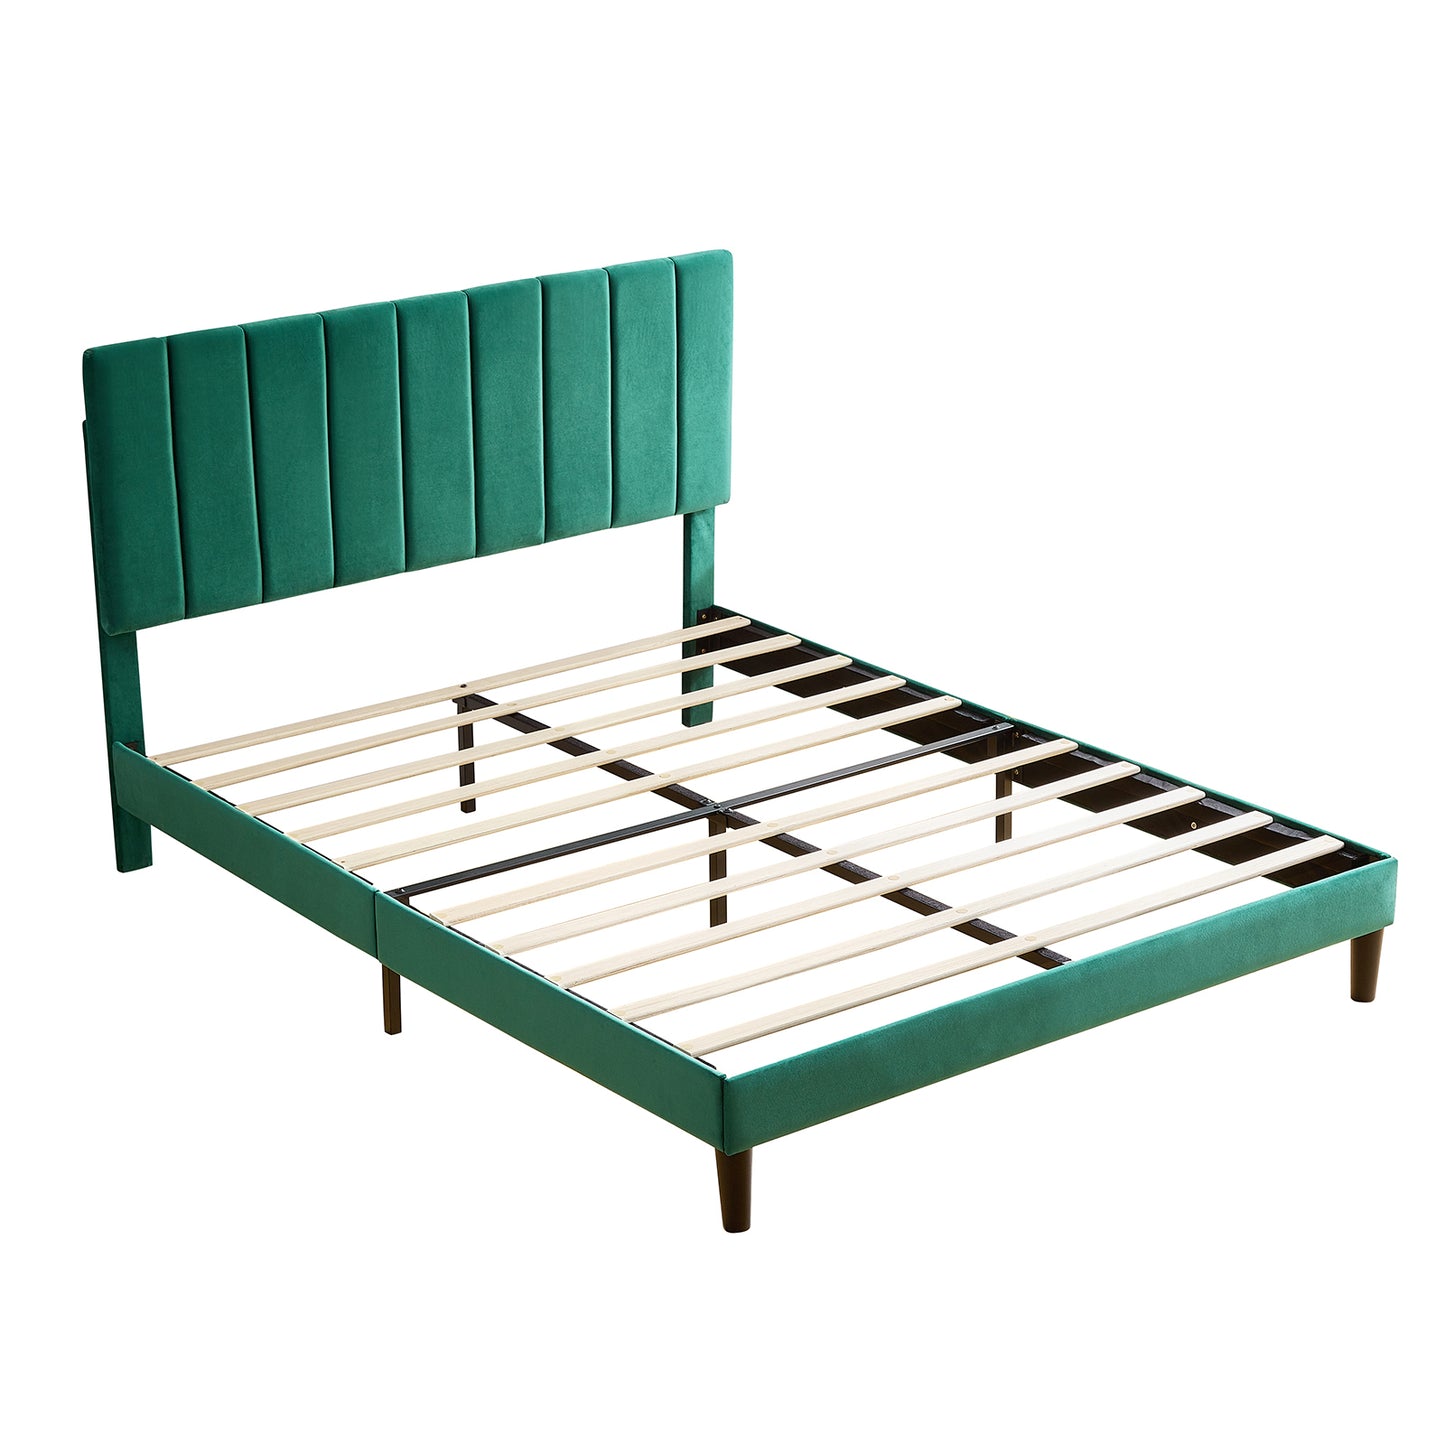 Queen Size Platform Bed with Upholstered Headboard and Slat Support, Heavy Duty Mattress Foundation, No Box Spring Required, Easy to Assemble, Green